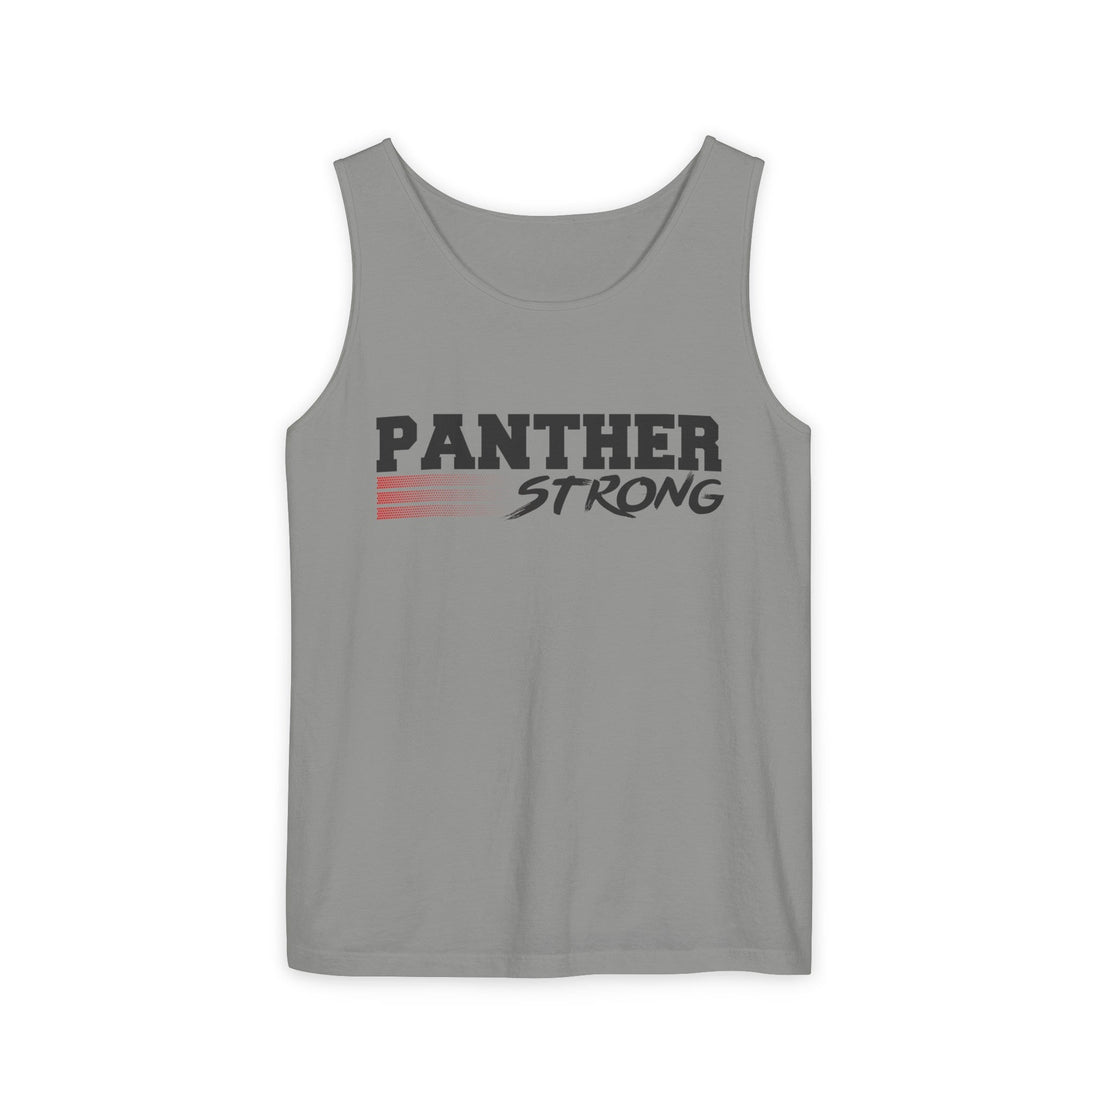 Panther Strong Unisex Garment - Dyed Tank Top - Tank Top - Positively Sassy - Panther Strong Unisex Garment - Dyed Tank Top